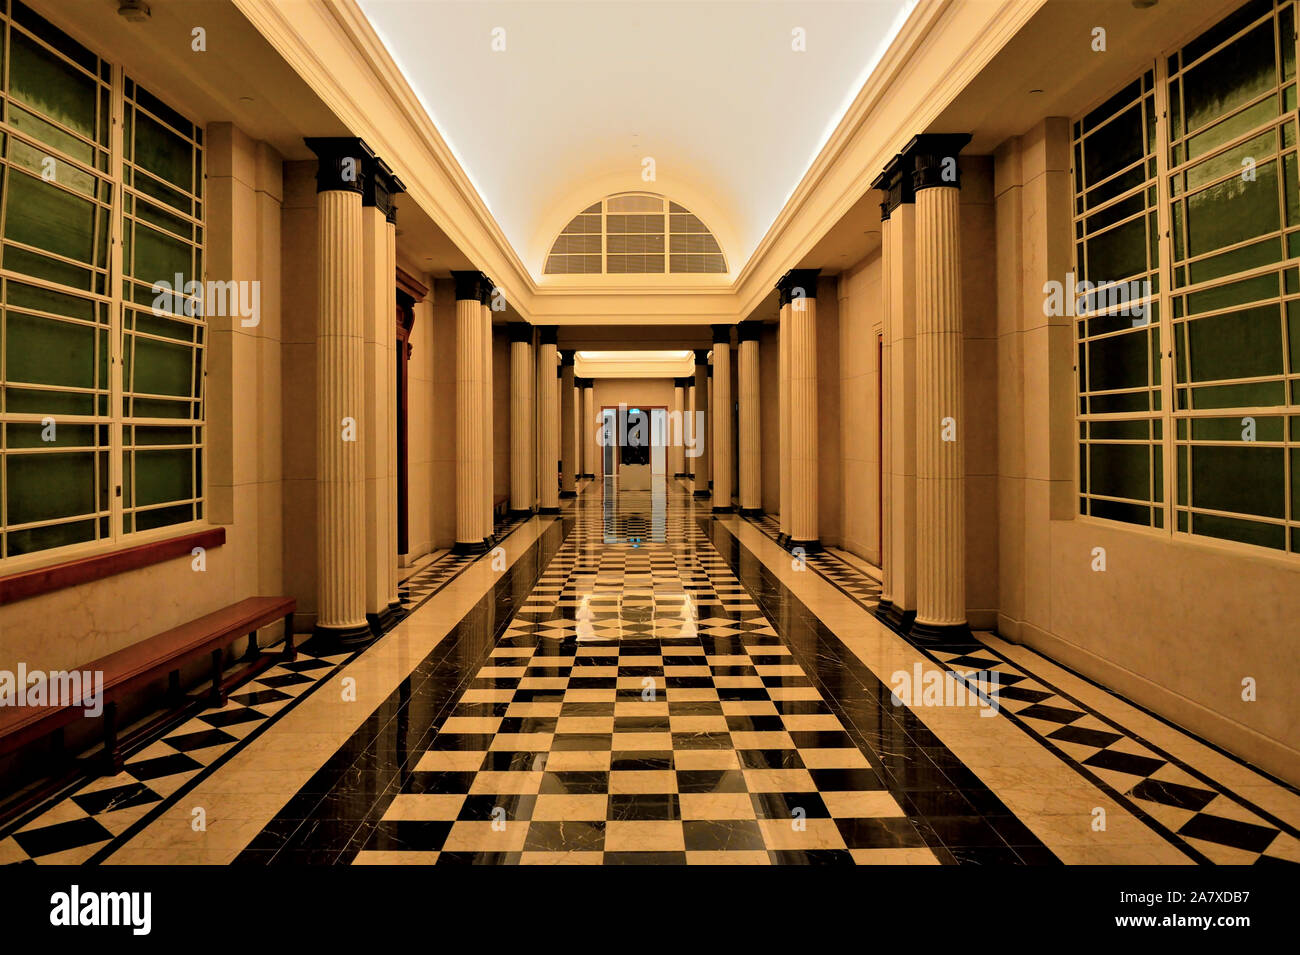 Singapore - September 17 2019: Corridor at National Gallery Singapore leading to the South East Asian collection Stock Photo